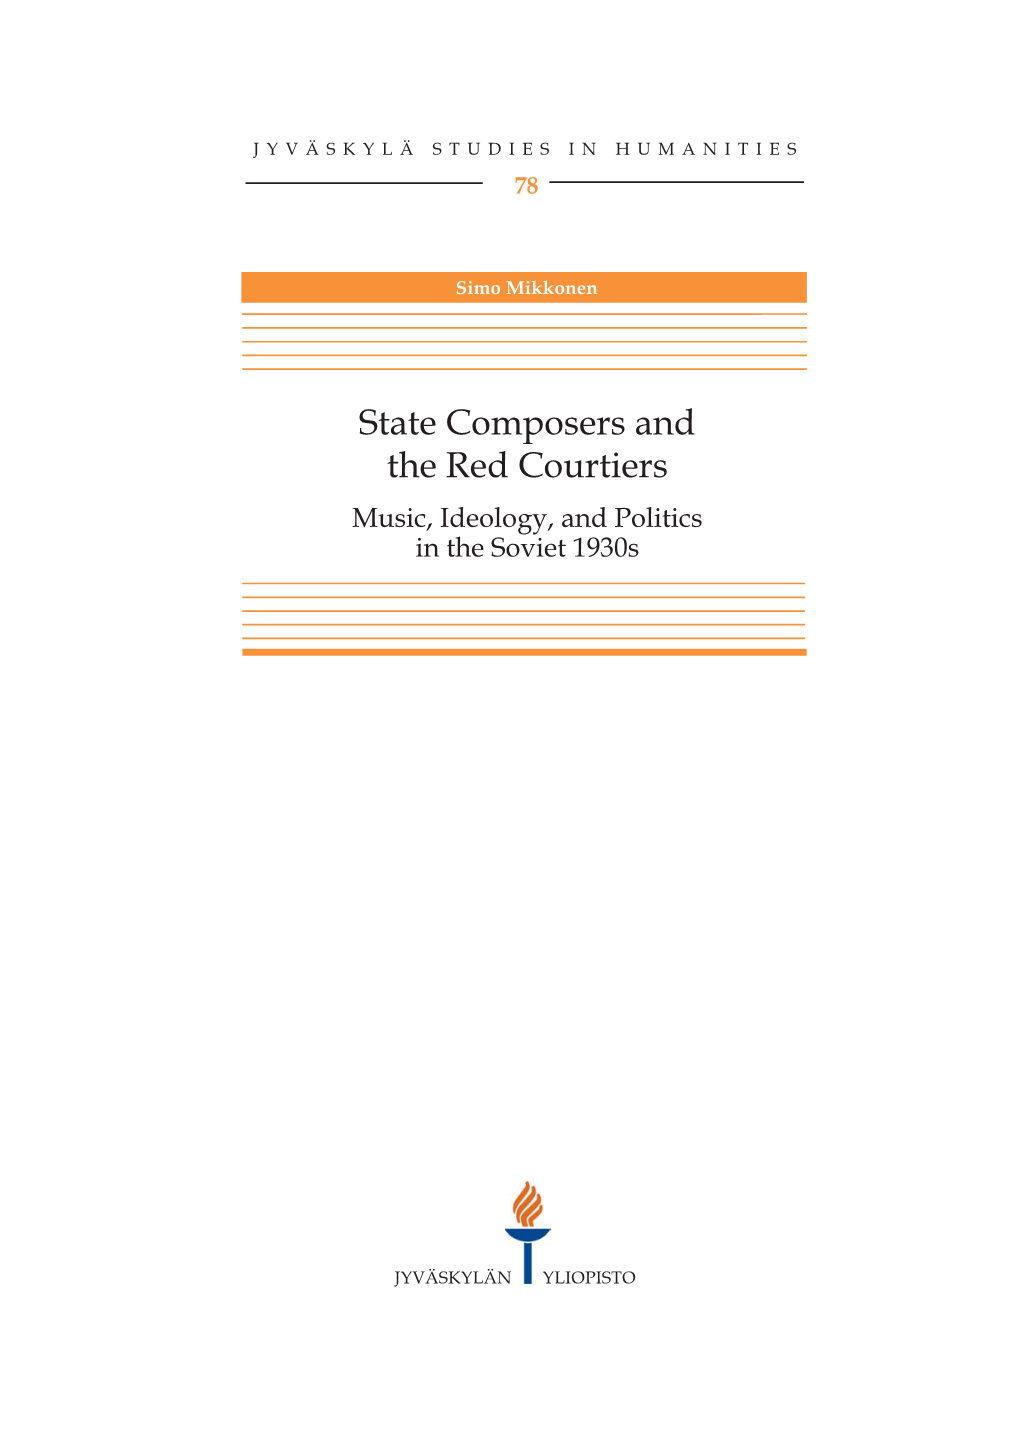 State Composers and the Red Courtiers: Music, Ideology, and Politics in the Soviet 1930S